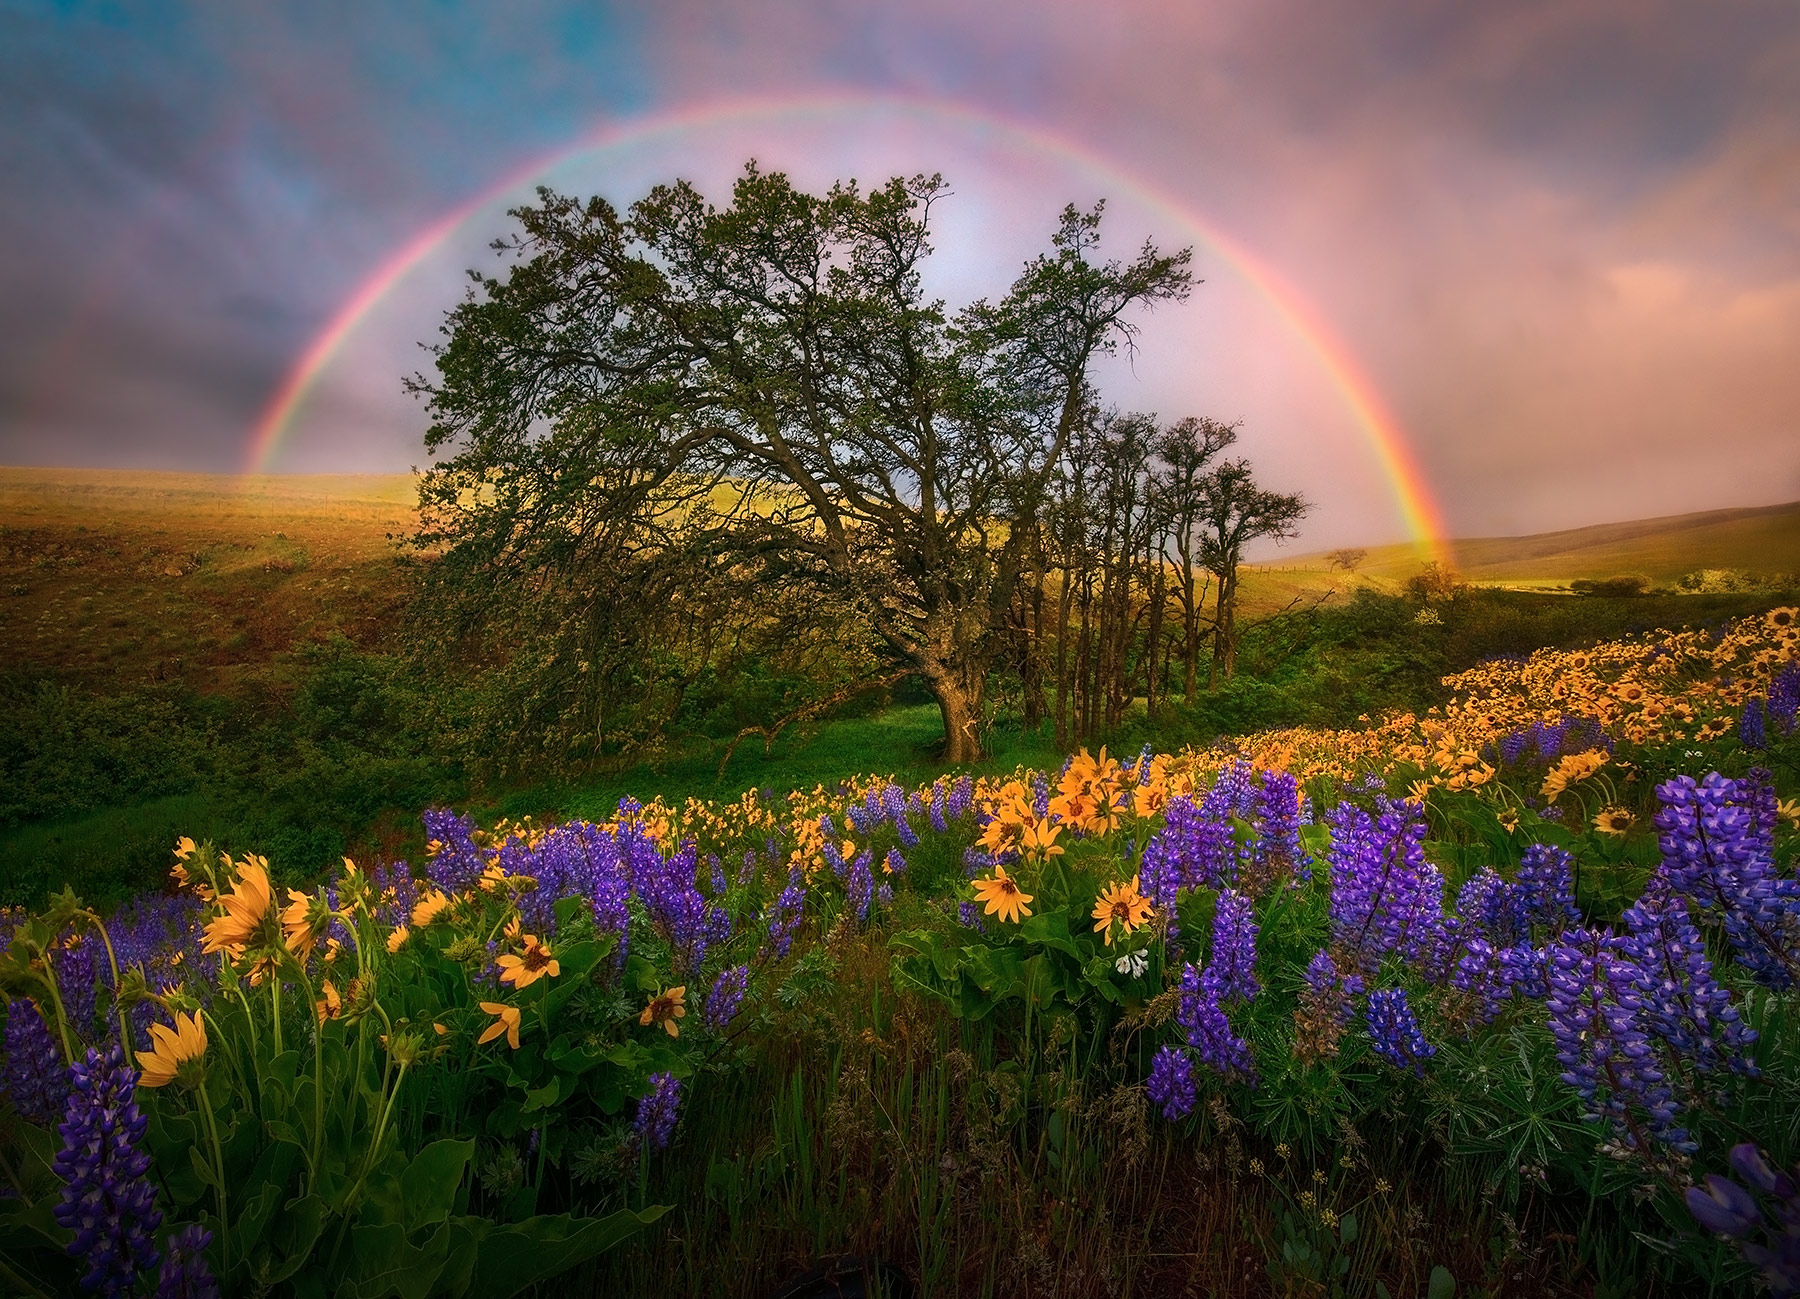 A very lucky moment of incredible light at a place I know well.  The rainbow and spring colors went very well togther on this...